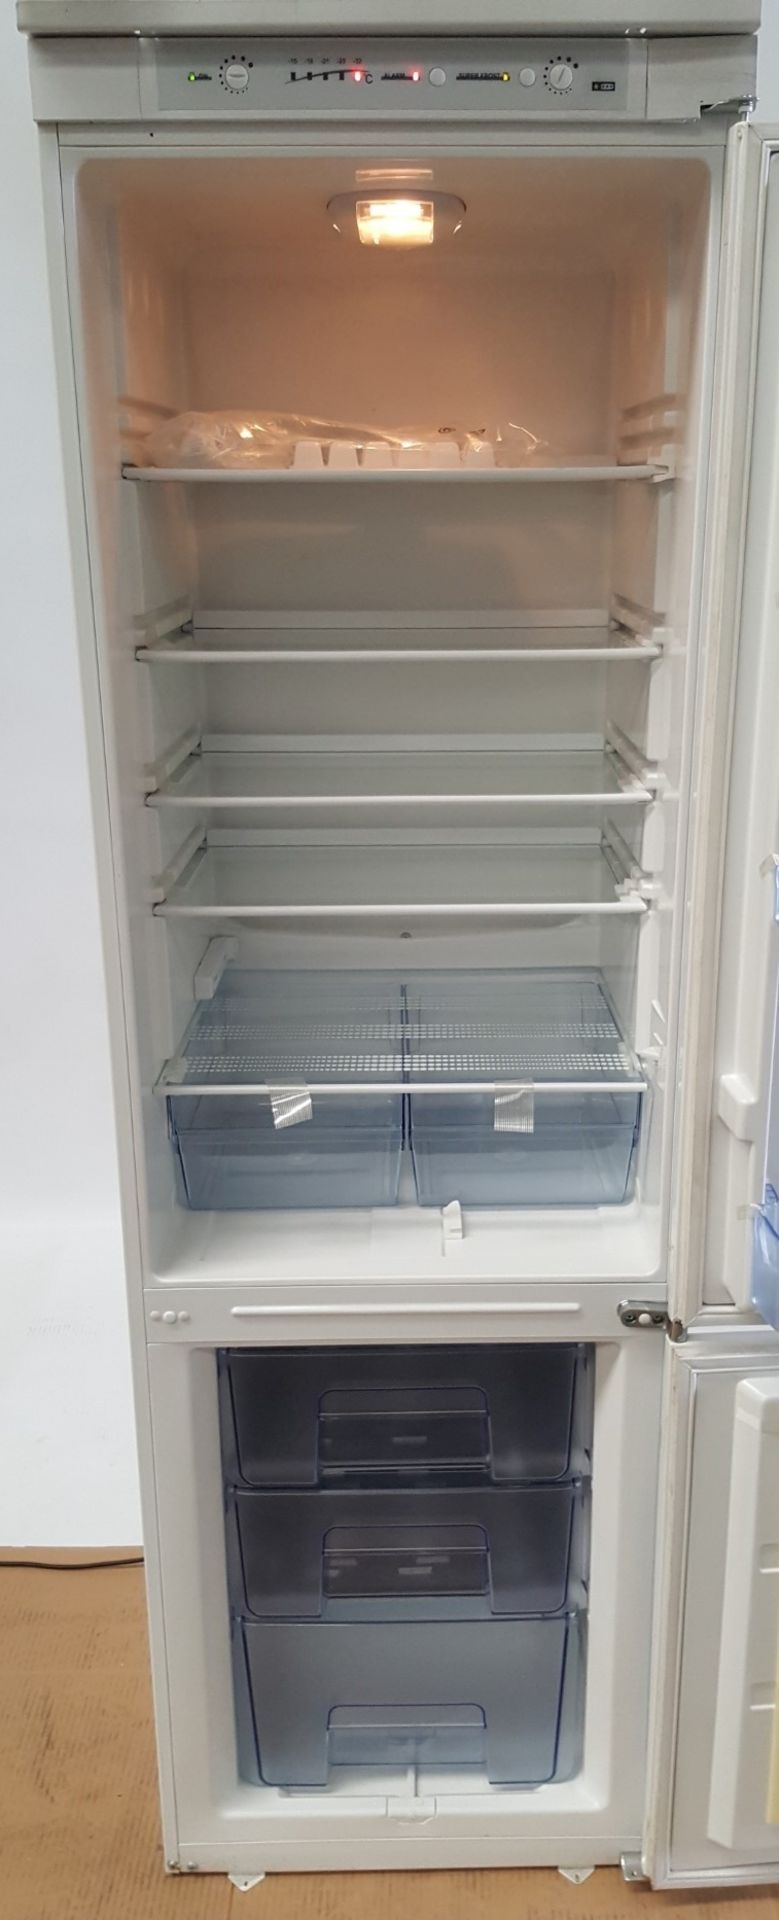 1 x Prima Integrated 70/30 Frost Free Fridge Freezer LPR472A1 - Ref BY152 - Image 4 of 7